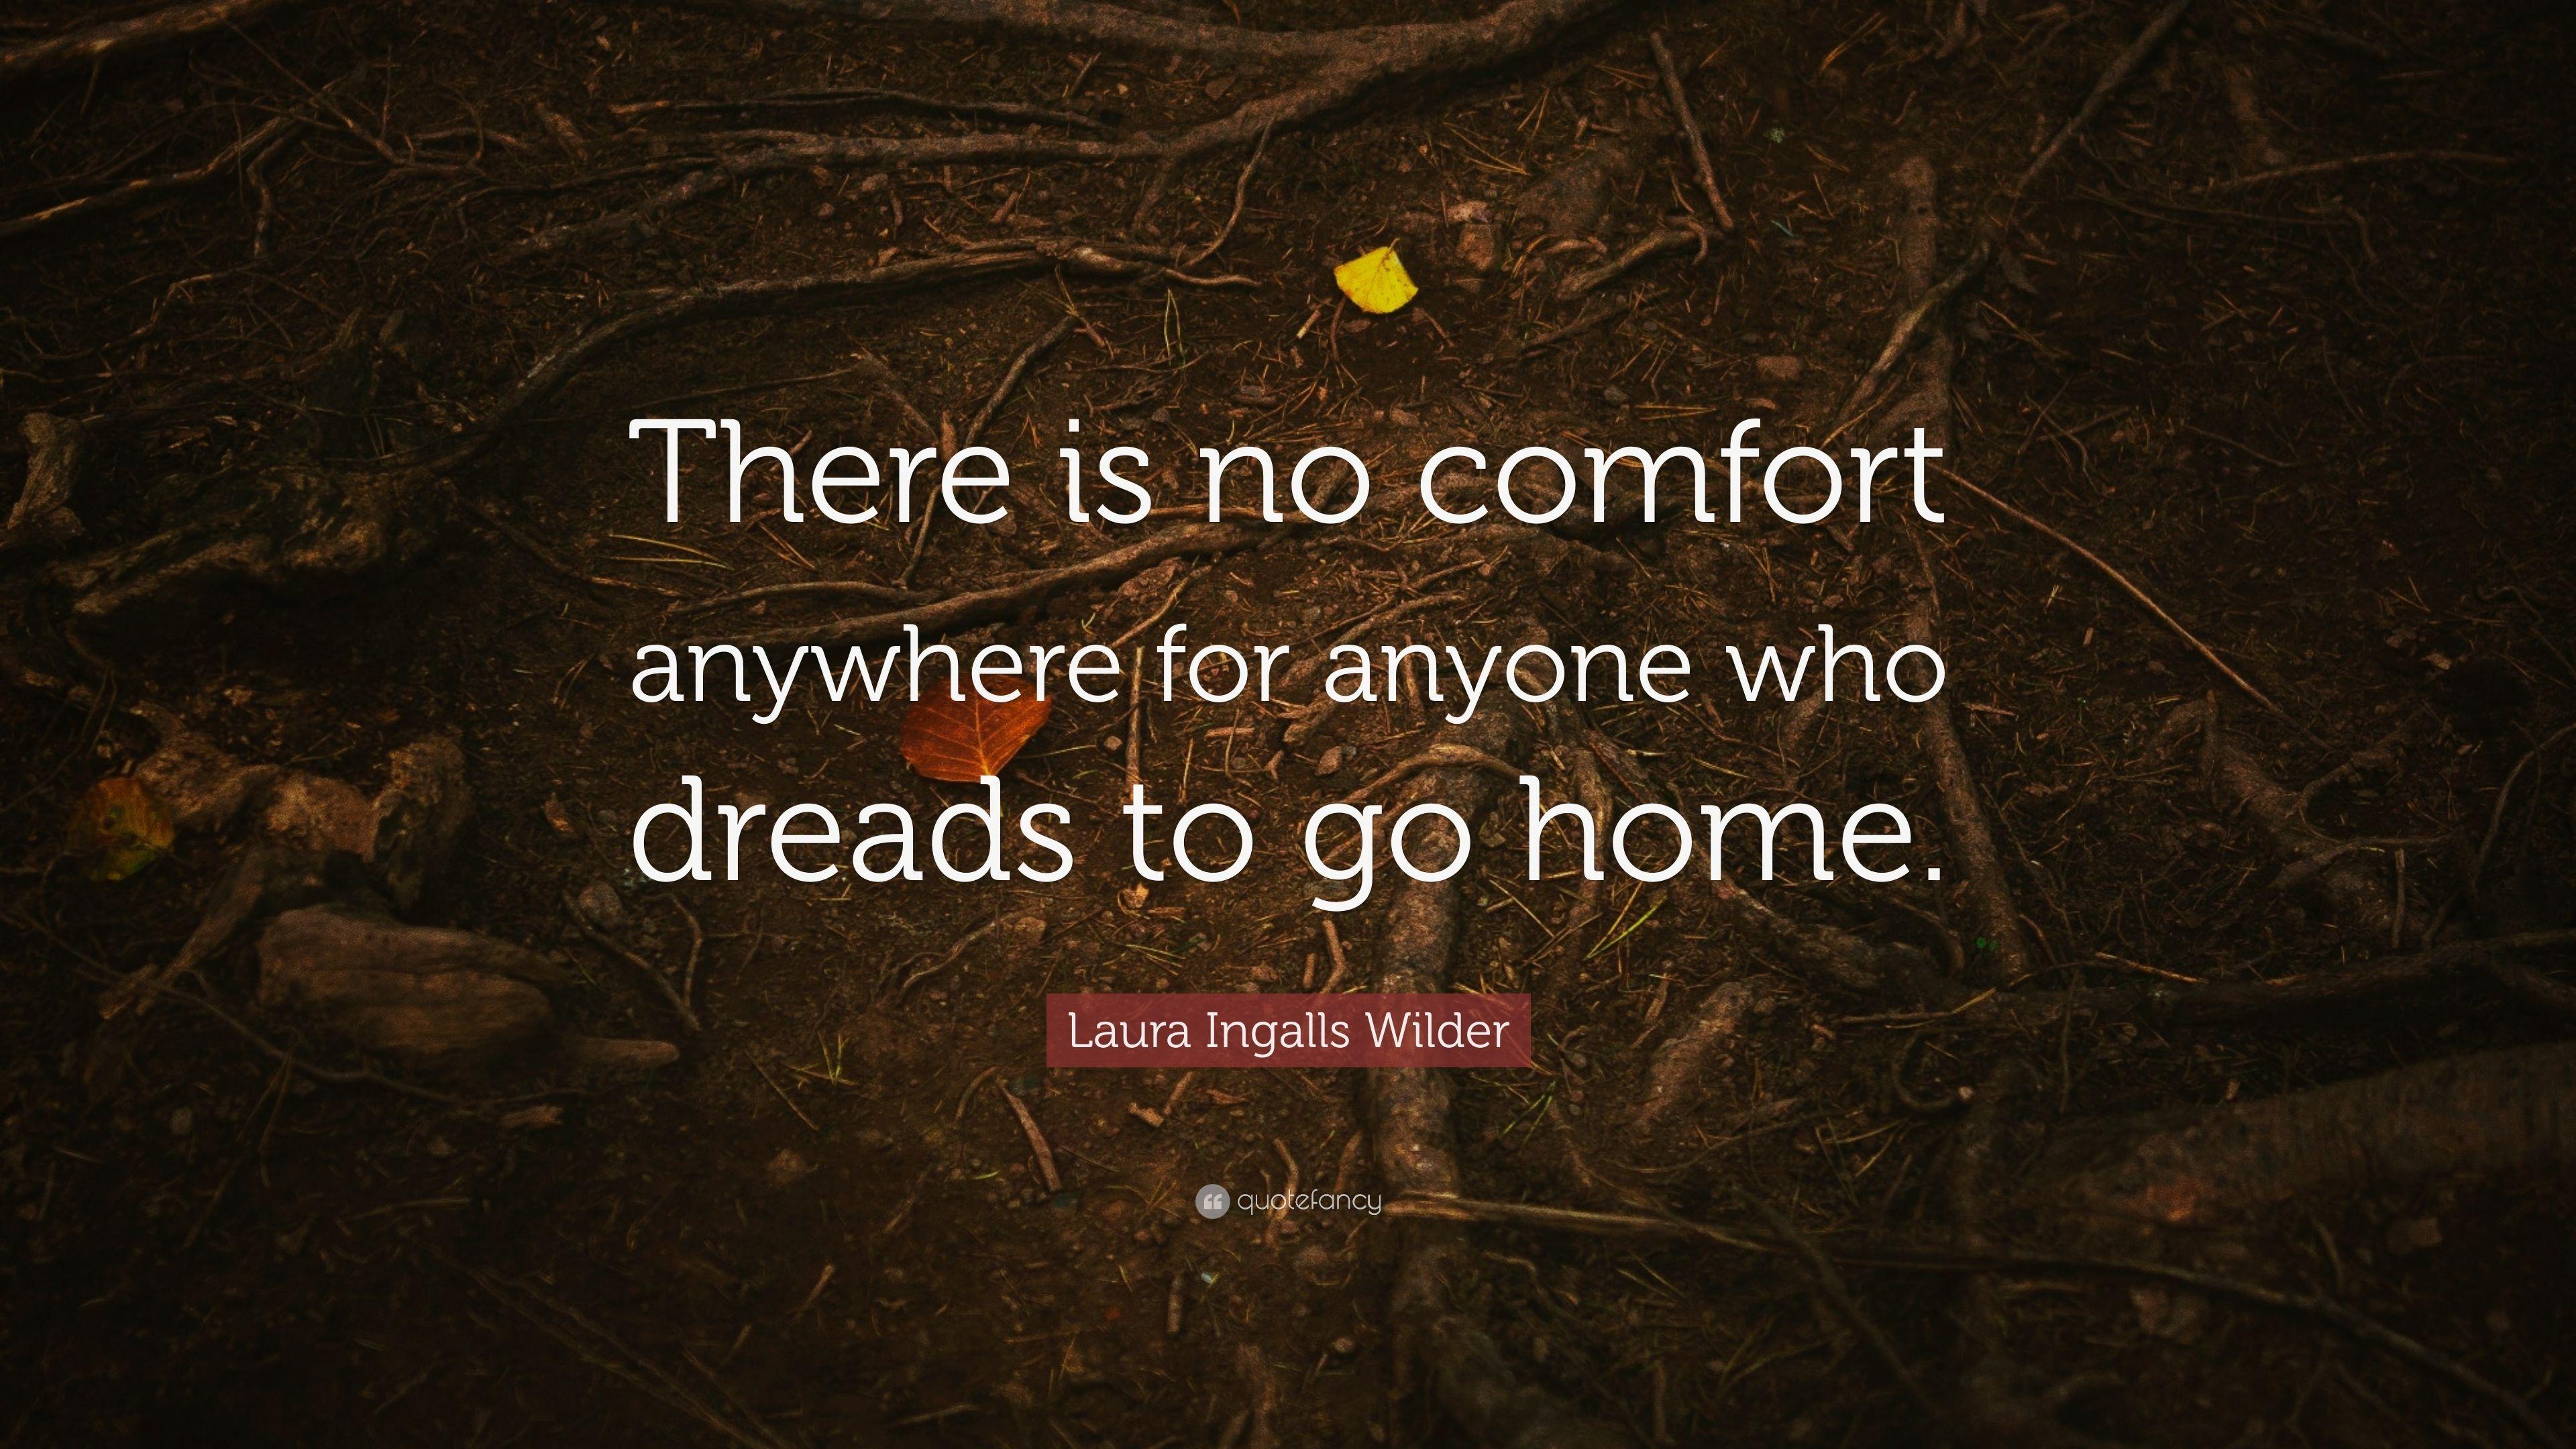 Laura Ingalls Wilder Quote: “There is no comfort anywhere for anyone